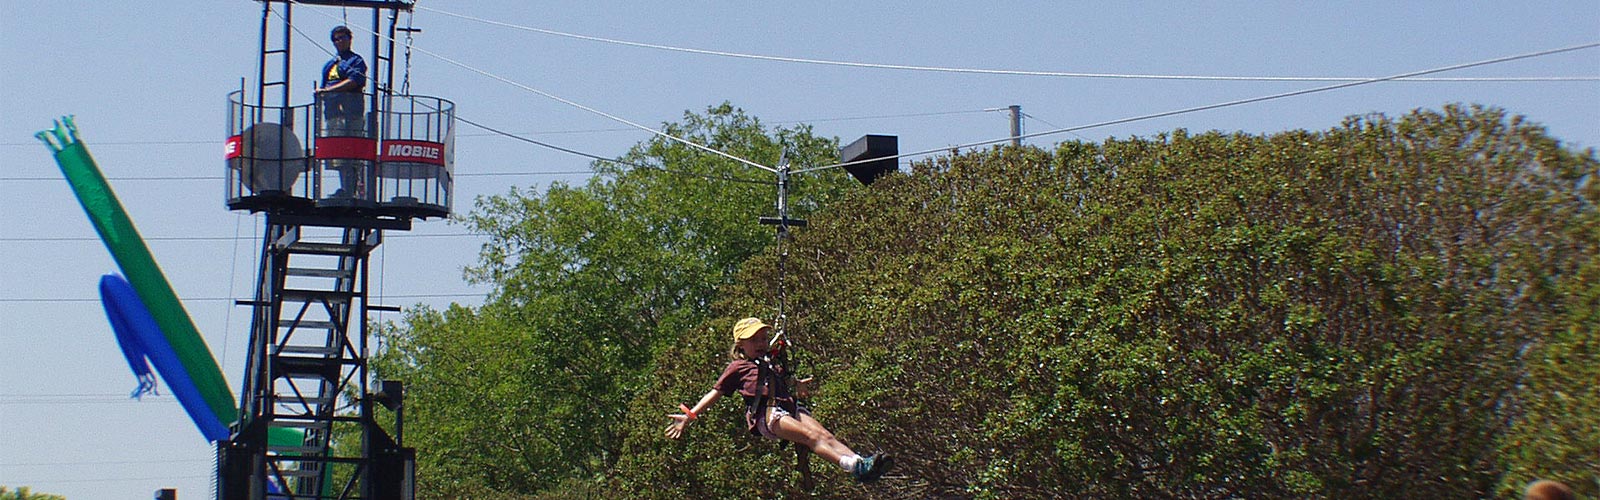 Zip Line Course Available